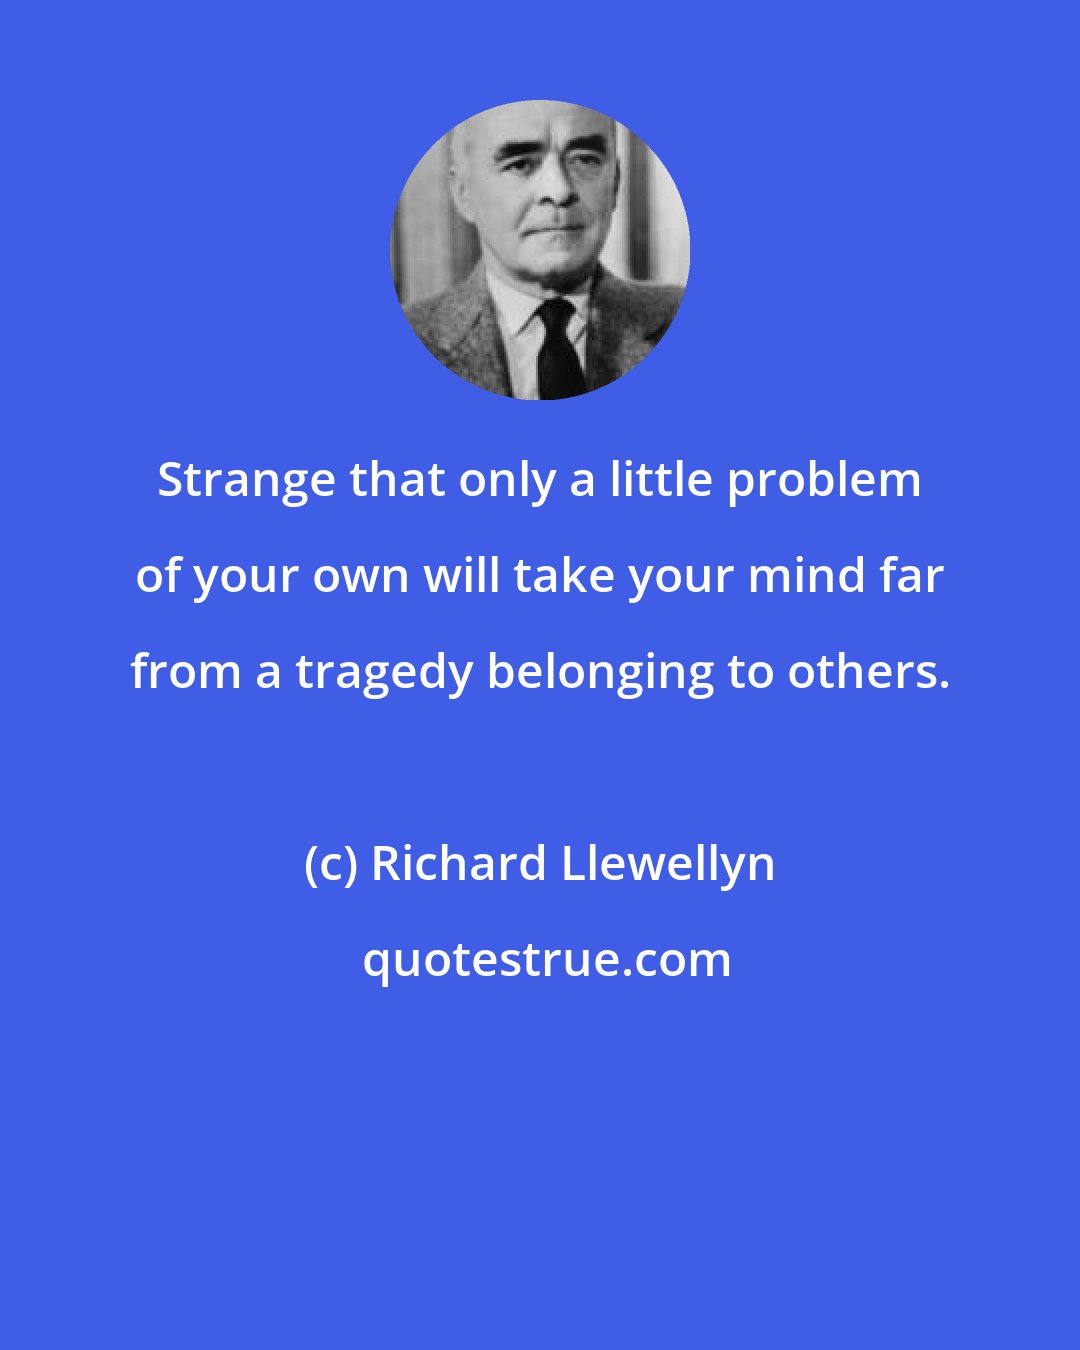 Richard Llewellyn: Strange that only a little problem of your own will take your mind far from a tragedy belonging to others.